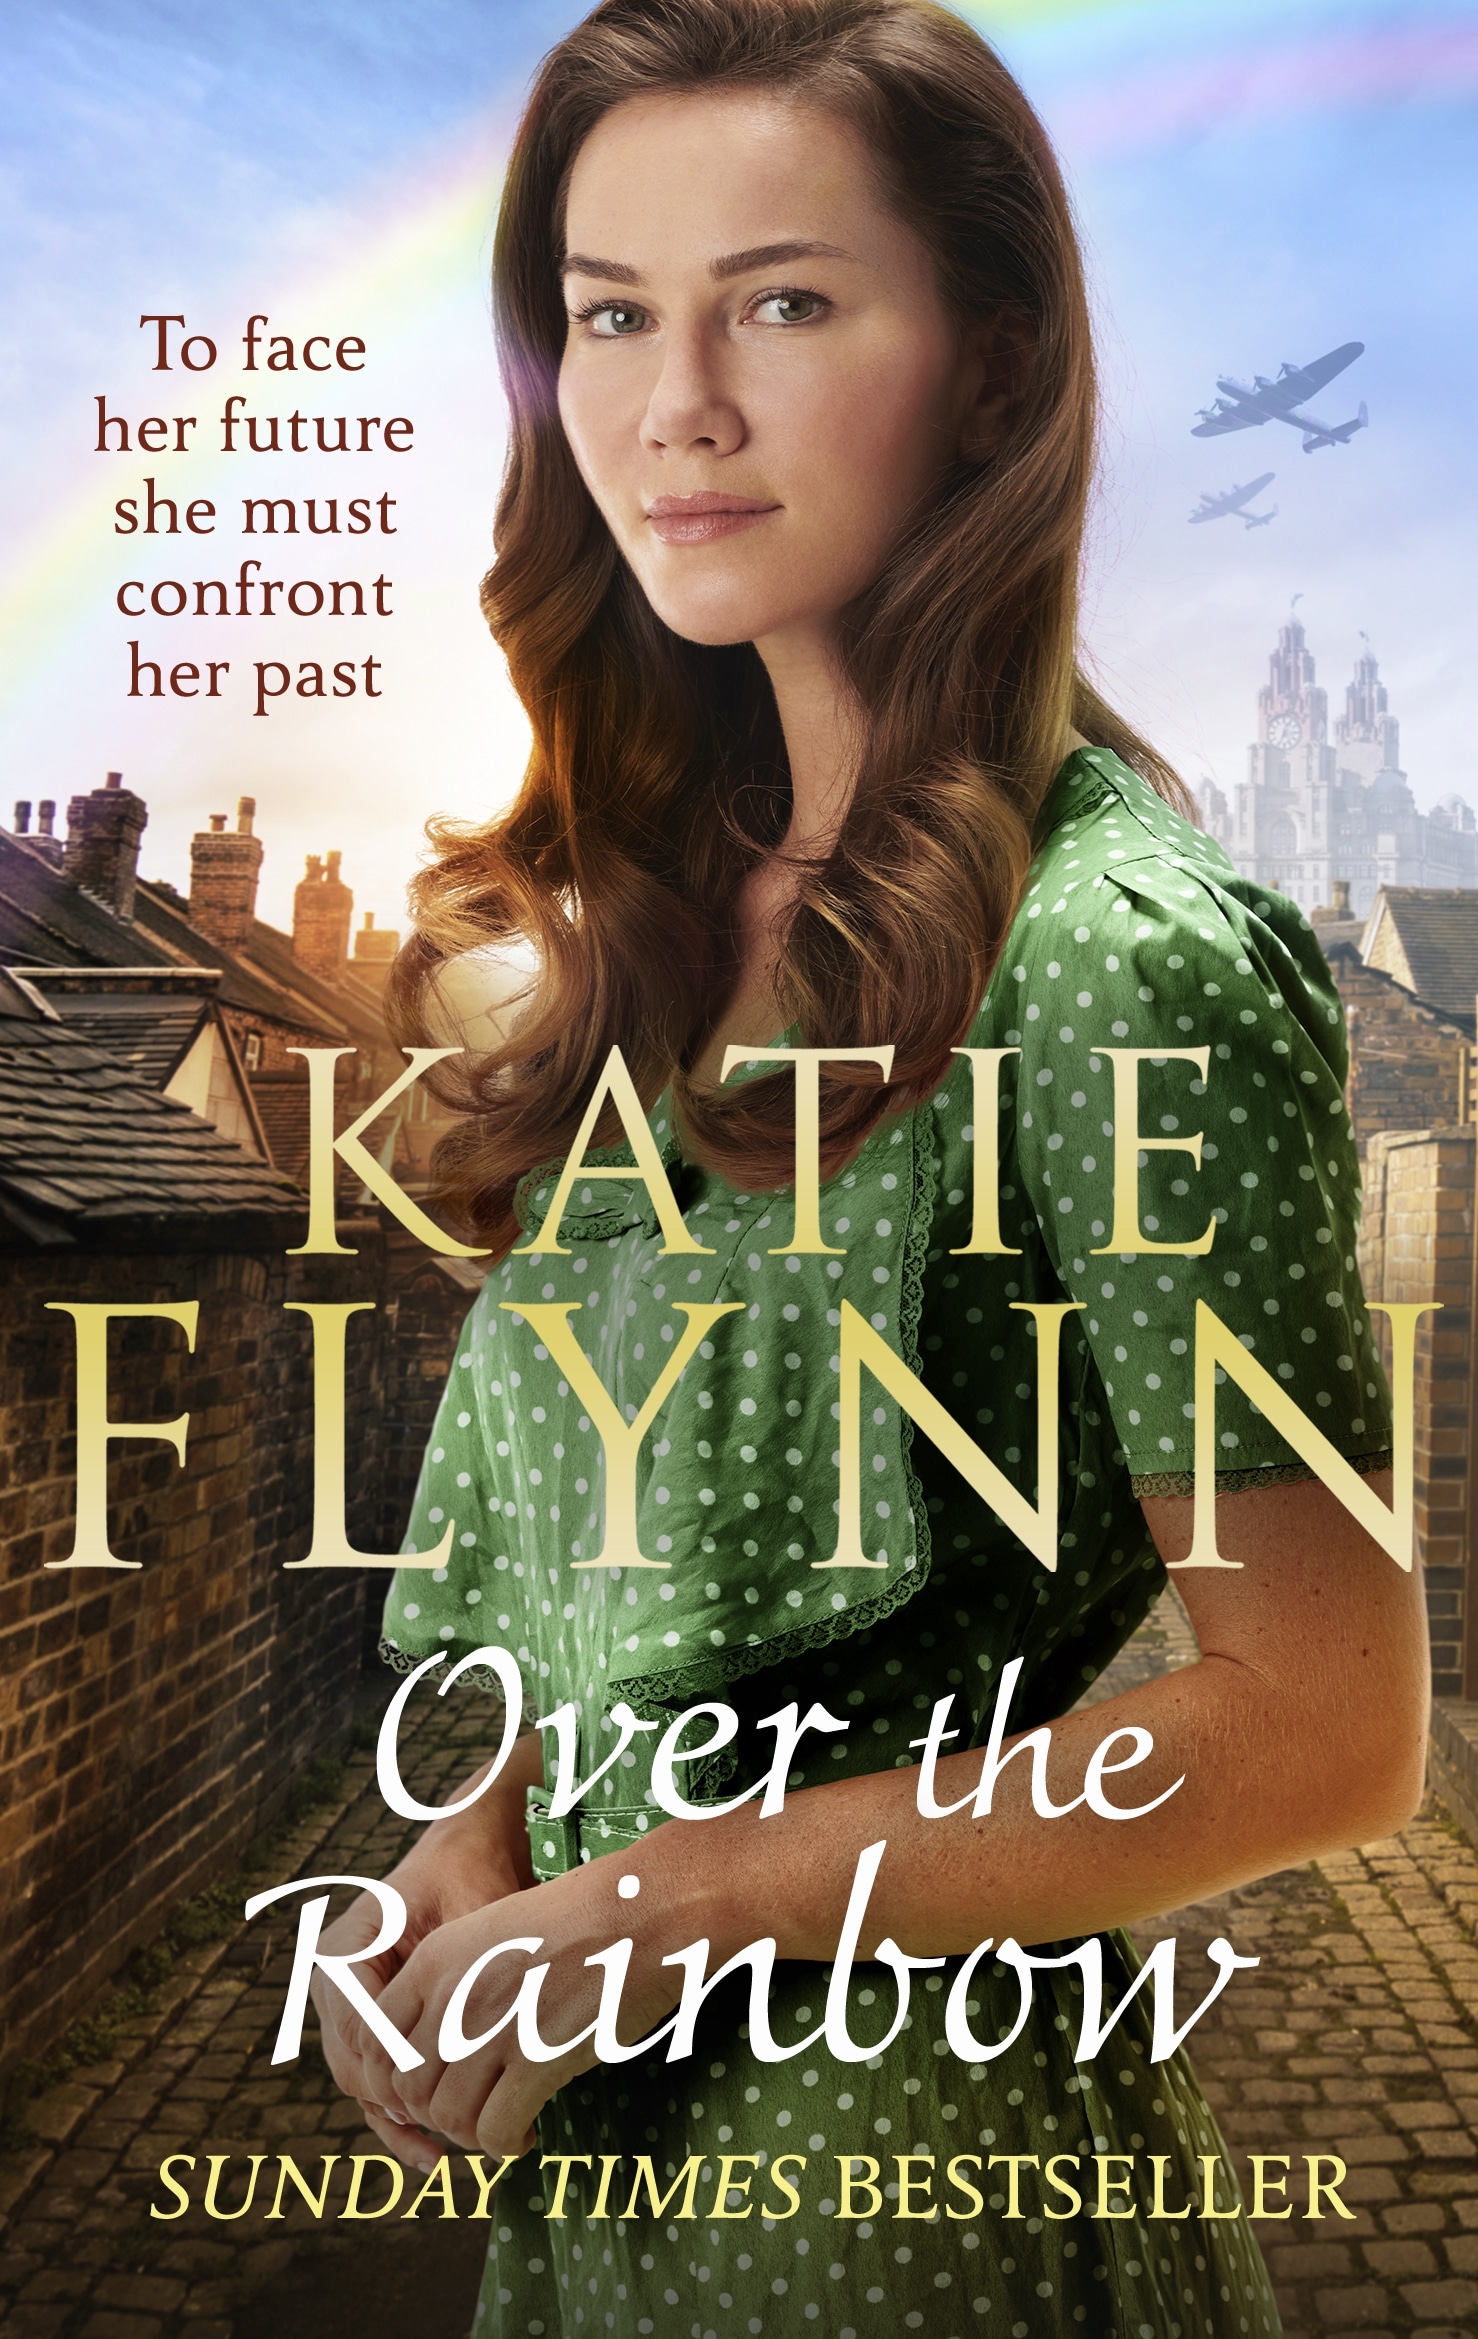 Book “Over the Rainbow” by Katie Flynn — March 4, 2021